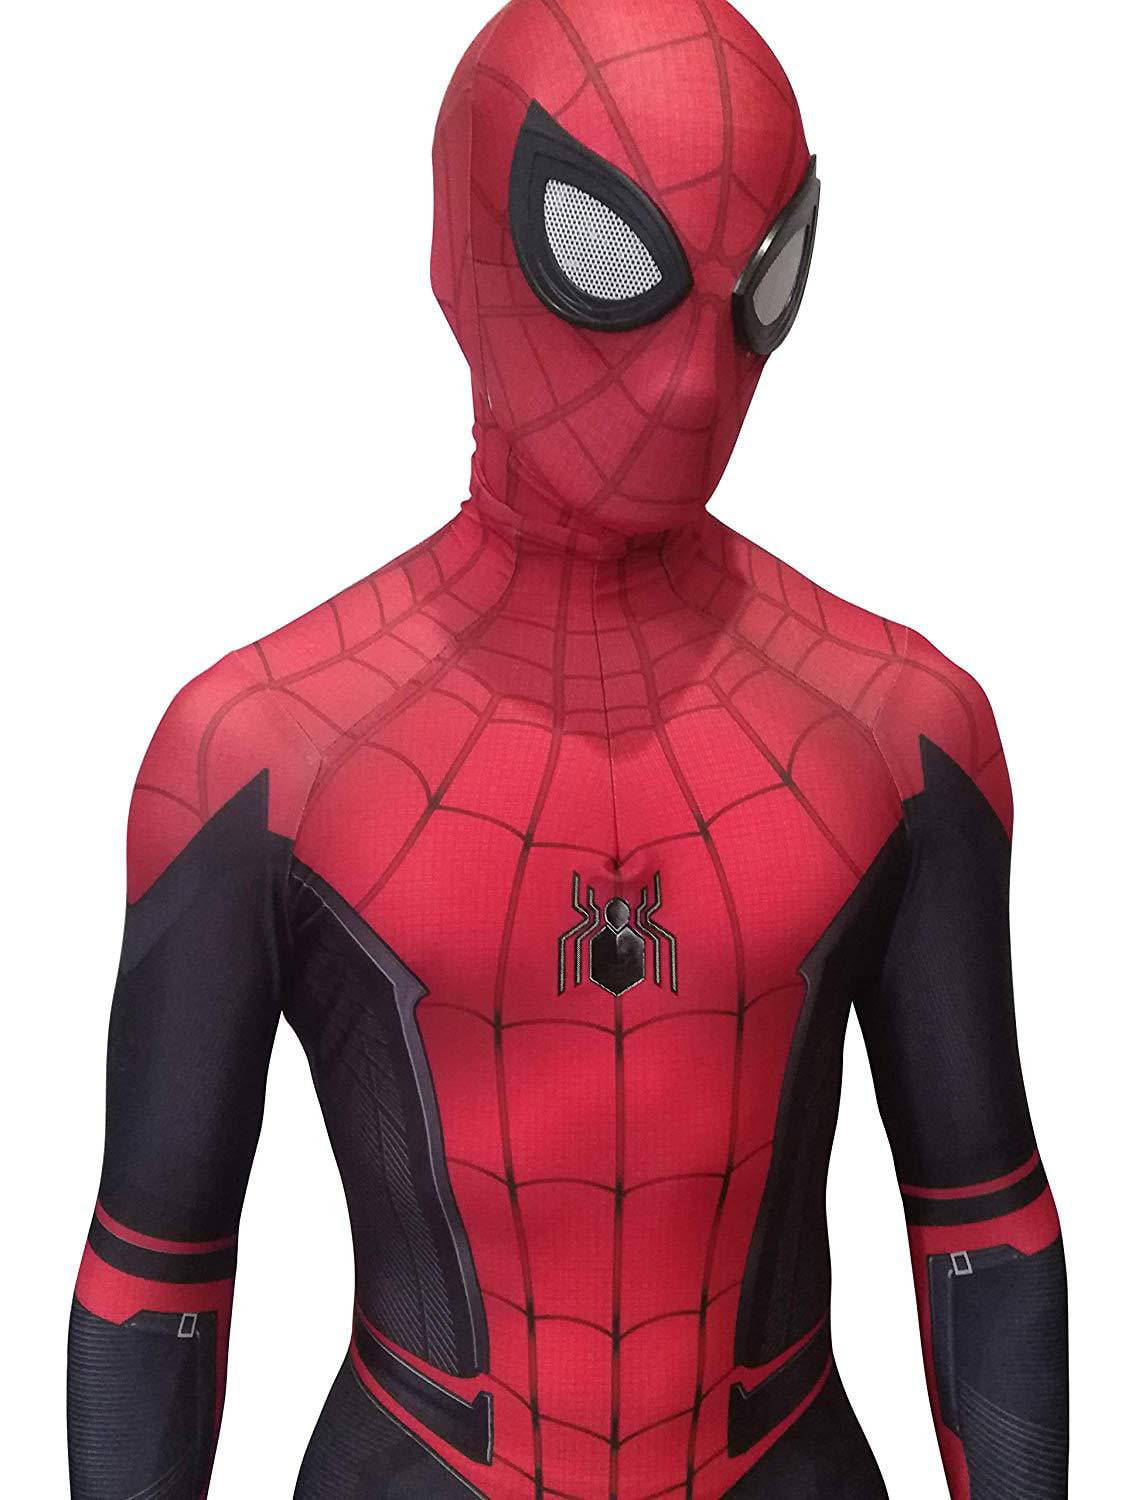 Spider-Man Far From Home Cosplay Costume Spiderman Zentai Suit For Adult & Kids 